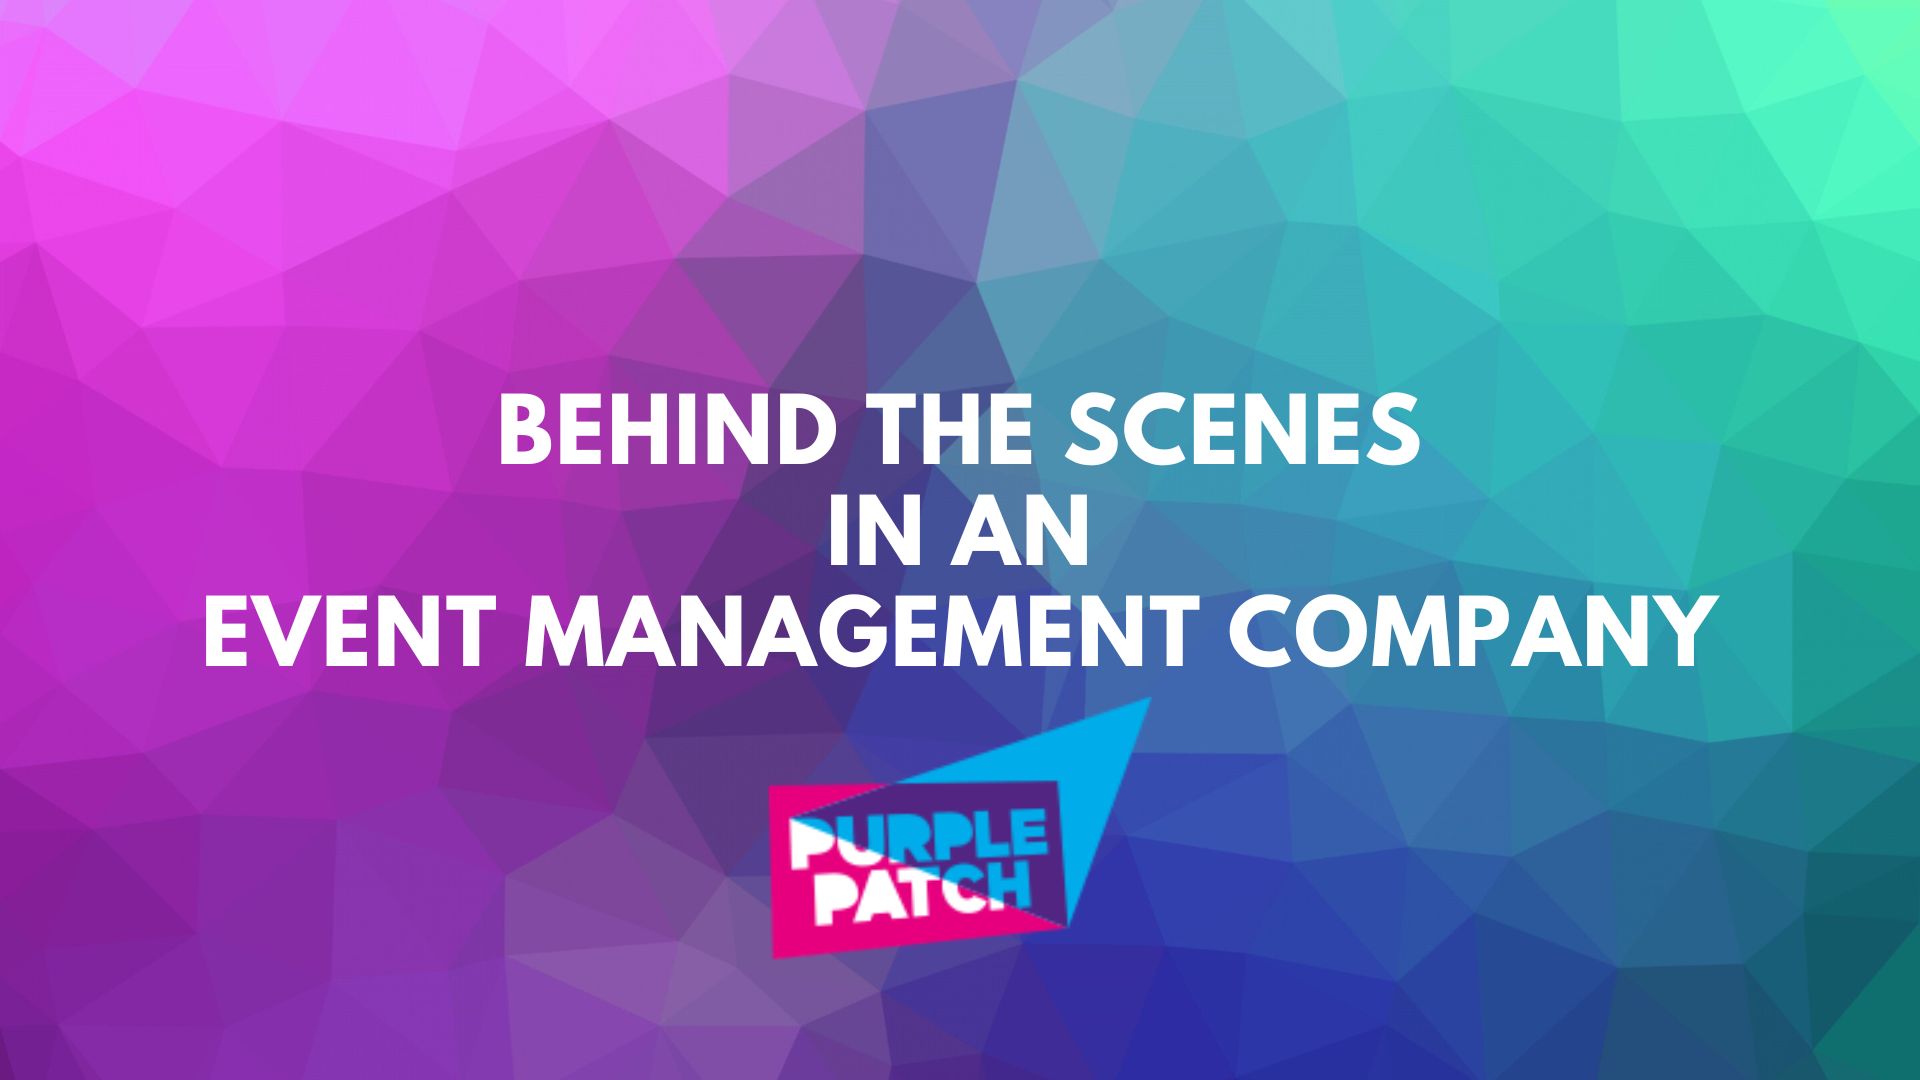 Behind the Scenes in an Event Management Company